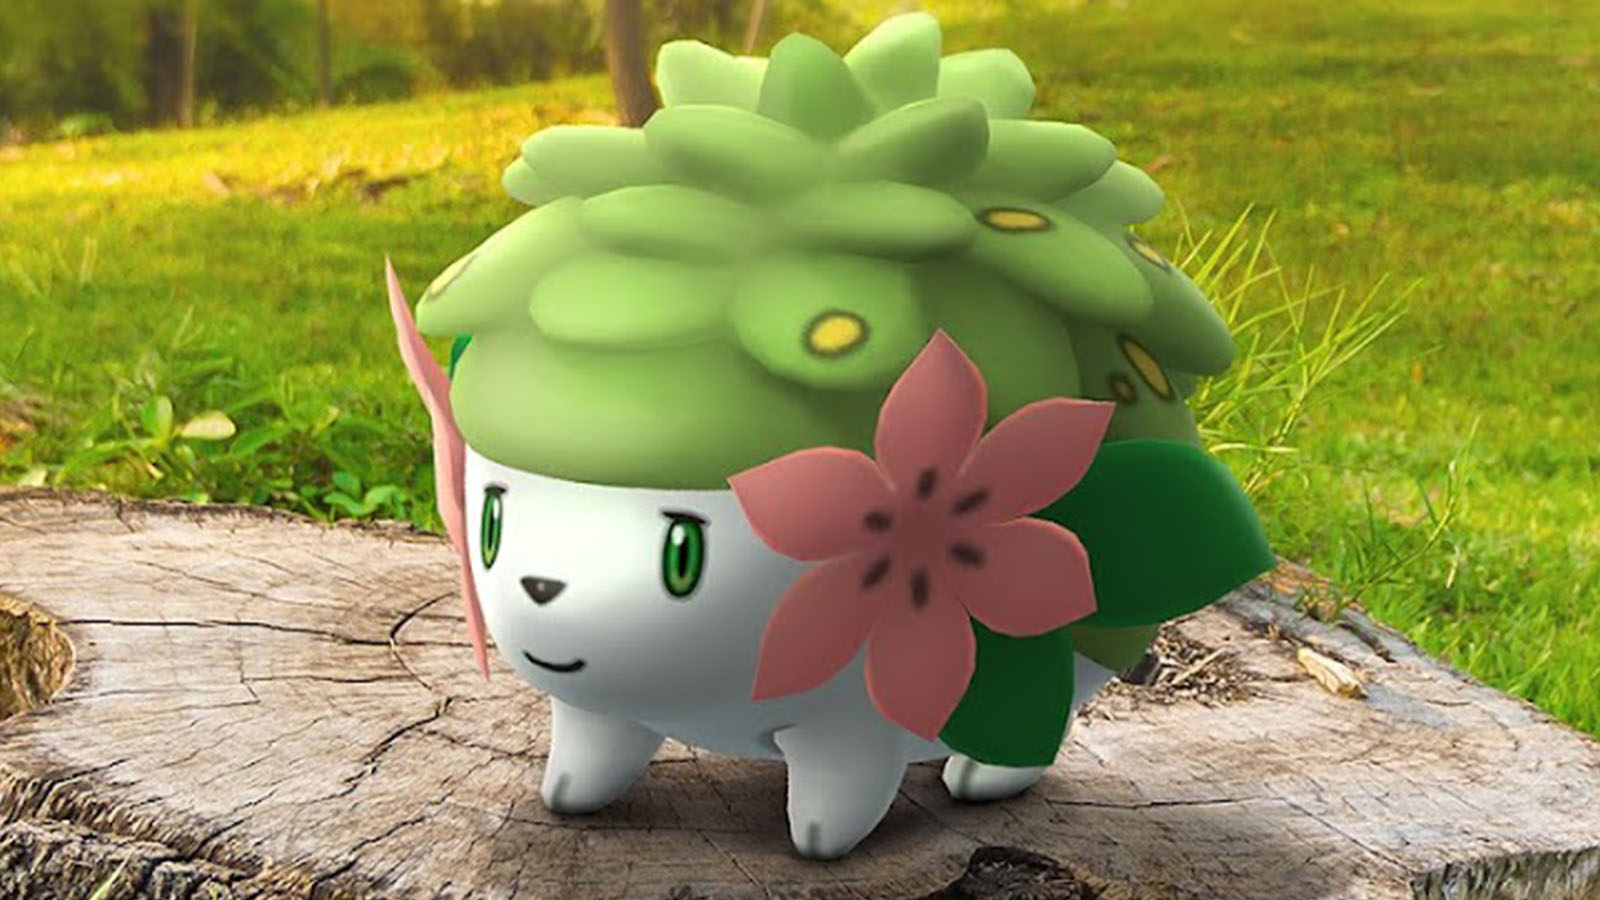 Does anyone else not want to catch Shaymin? : r/pokemongo